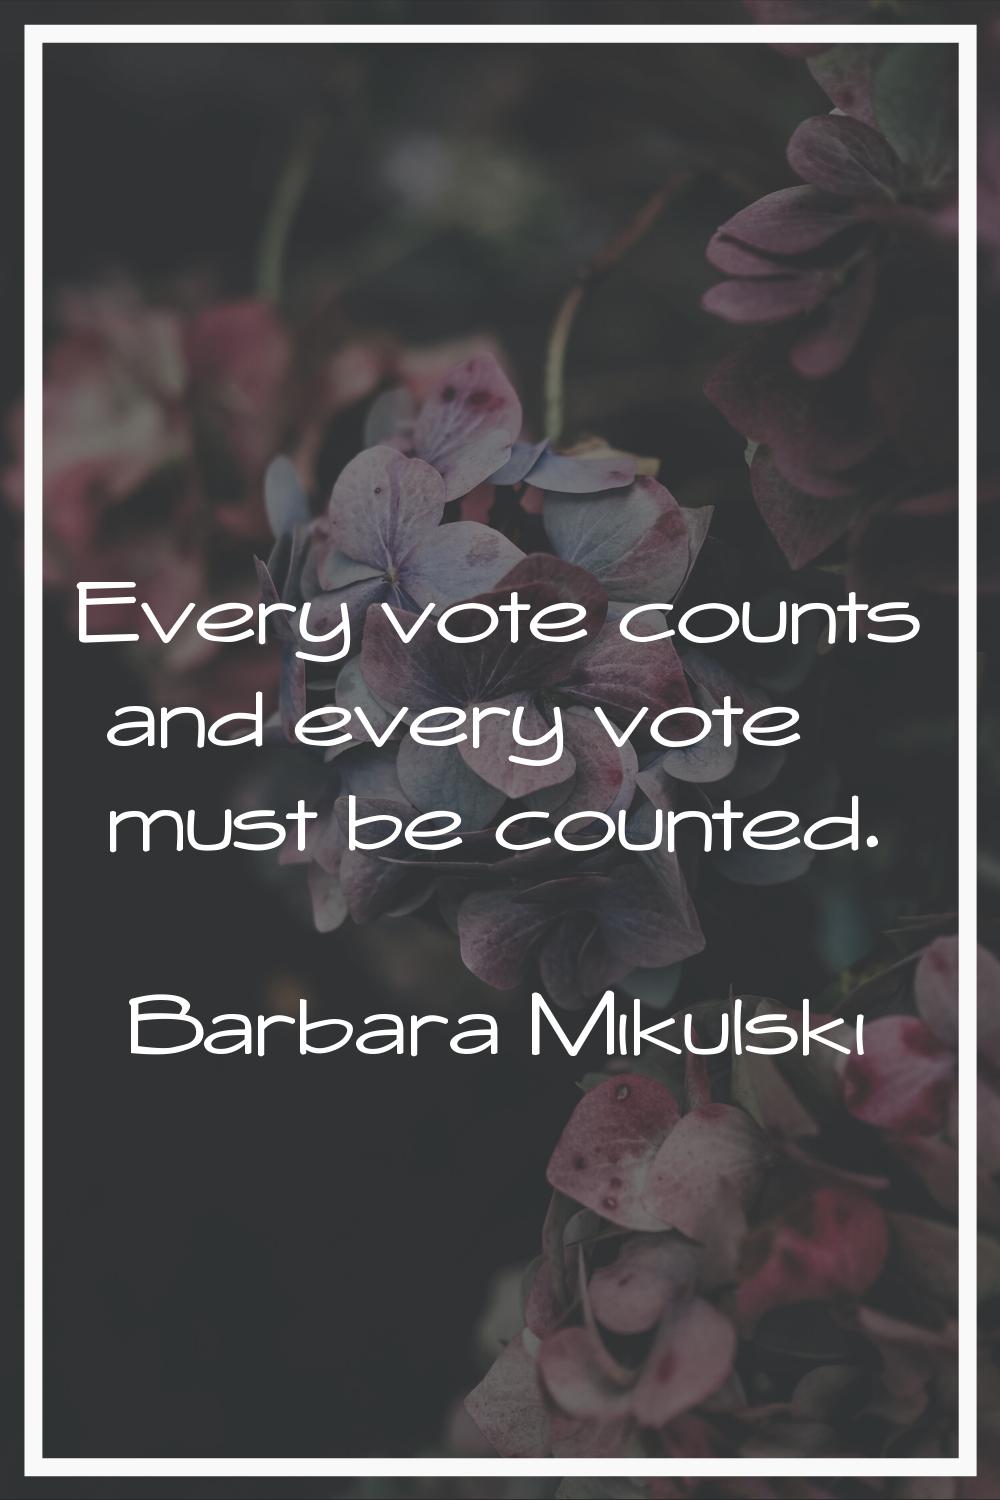 Every vote counts and every vote must be counted.